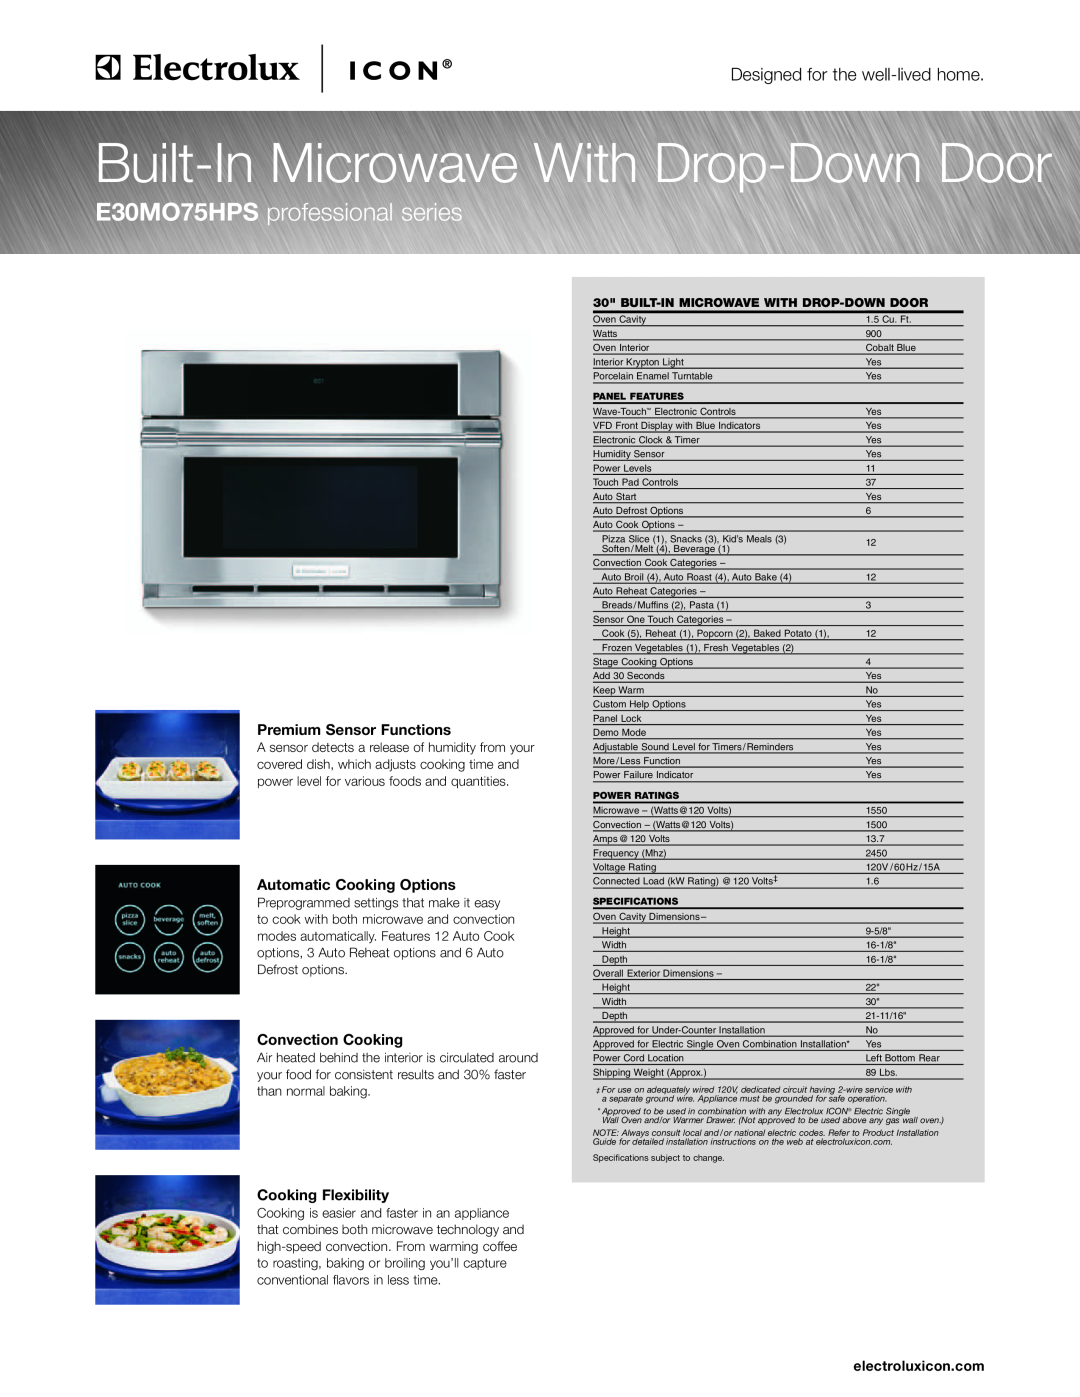 Electrolux E30MO75HPS dimensions Microwave Wall Oven Installation Instructions, Product Dimensions 